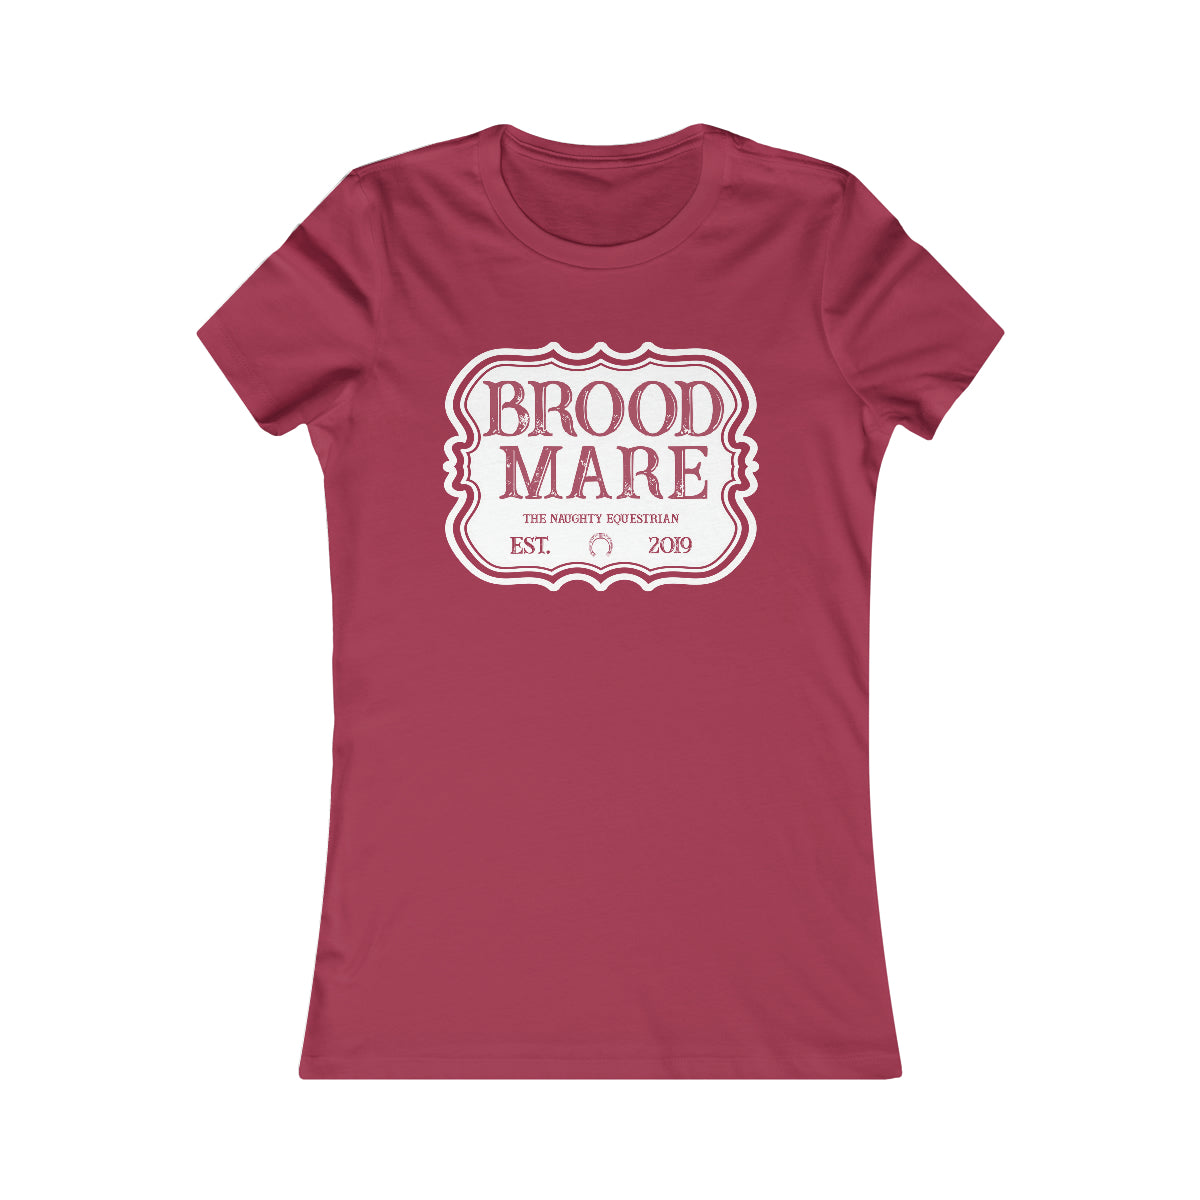 The Naughty Equestrian Brood Mare Equestrian Shirt